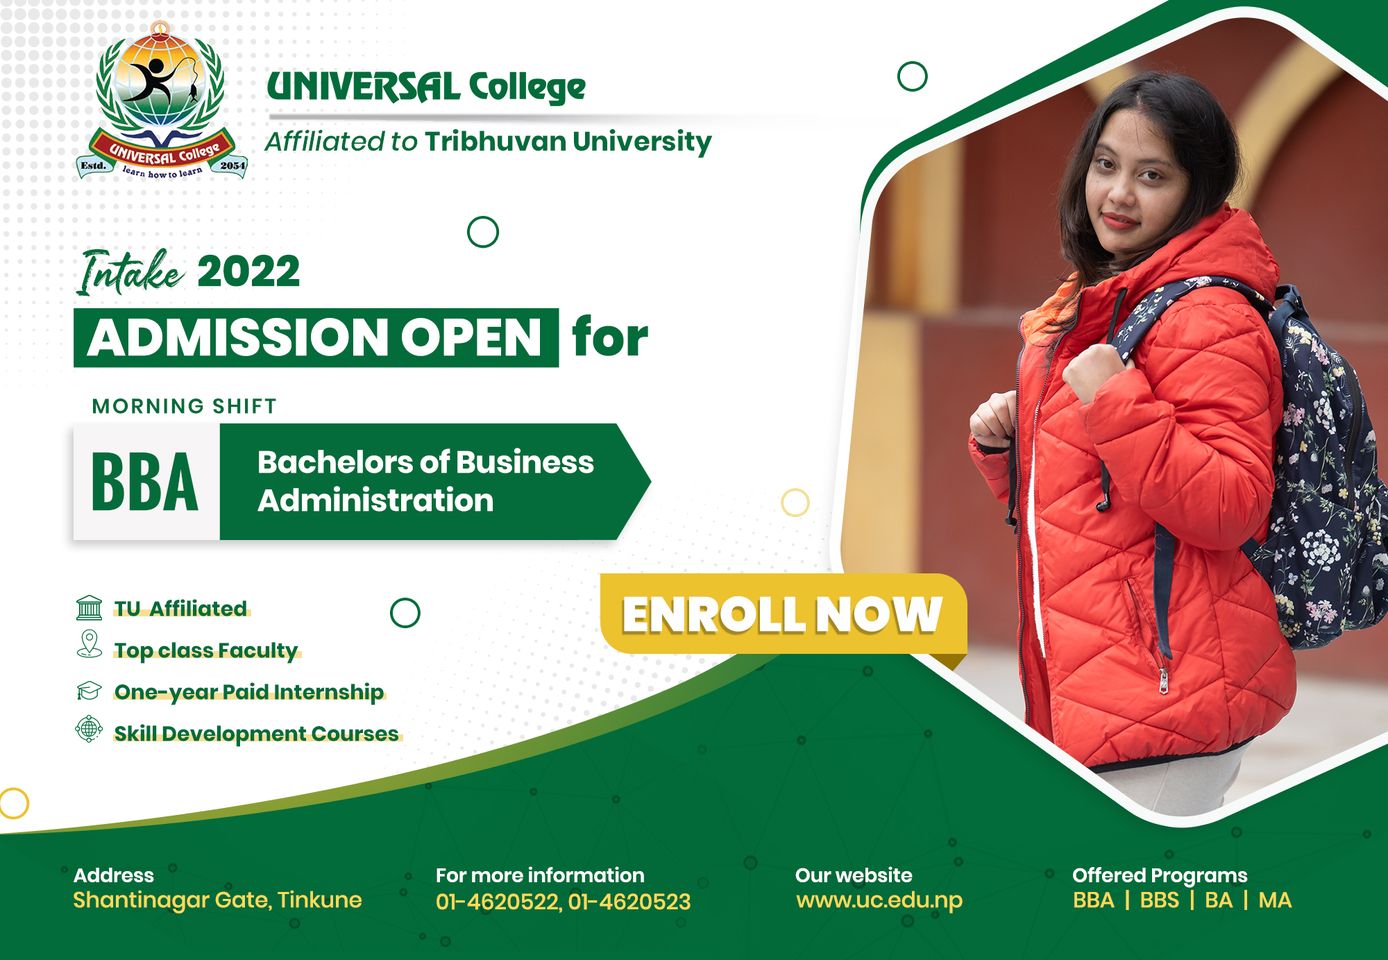 Admission Open for BBA (Morning Shift) at Universal College.